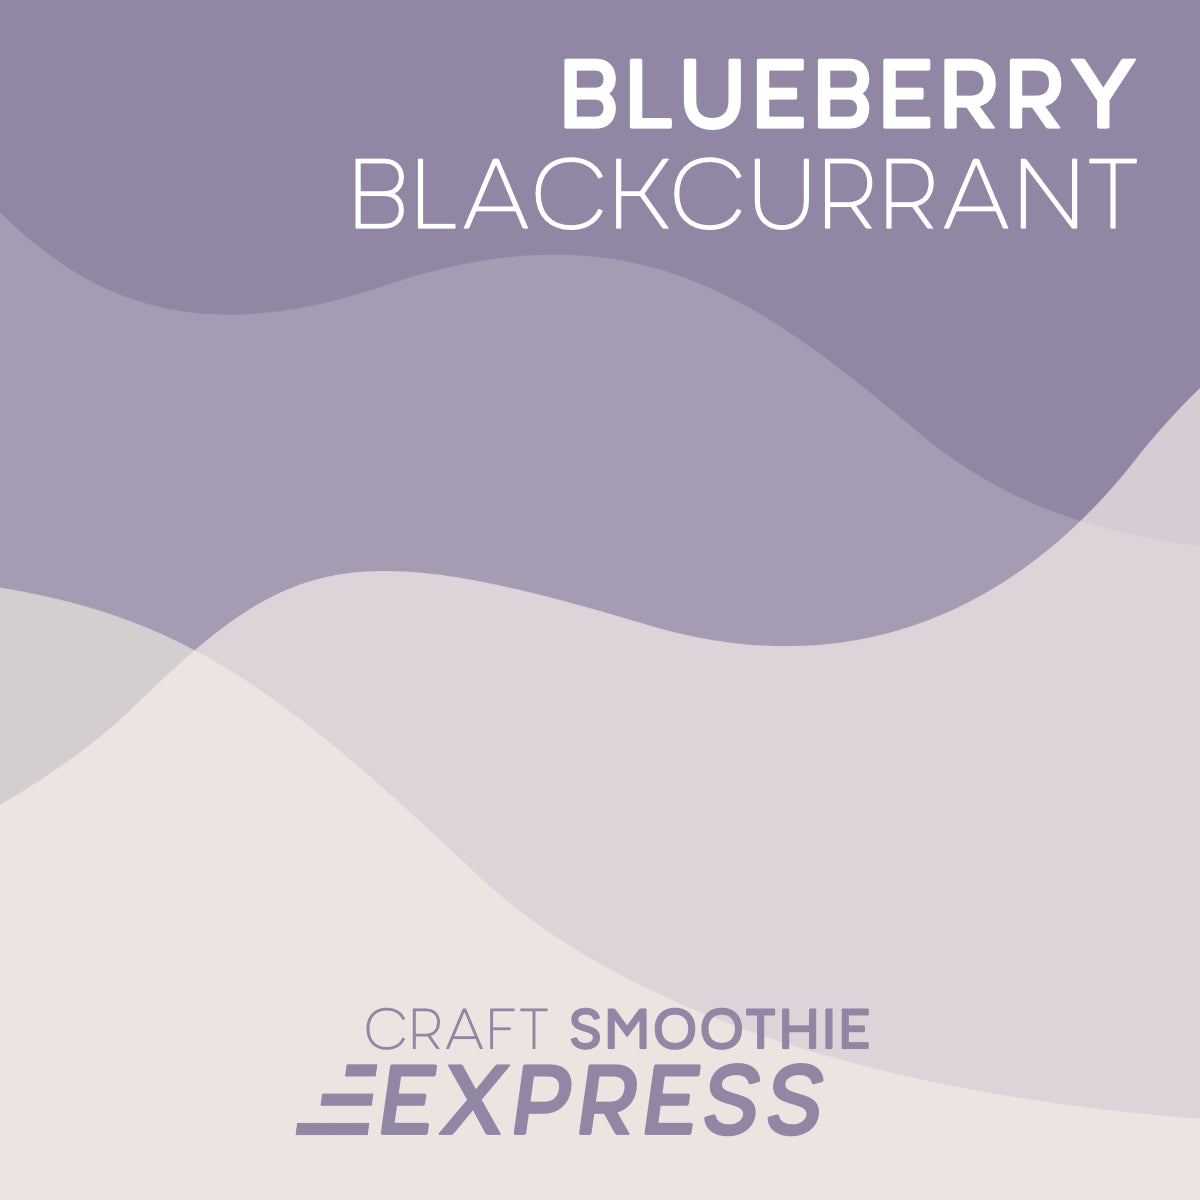 Blueberry Blackcurrant smoothie pouch by Craft Smoothie Express